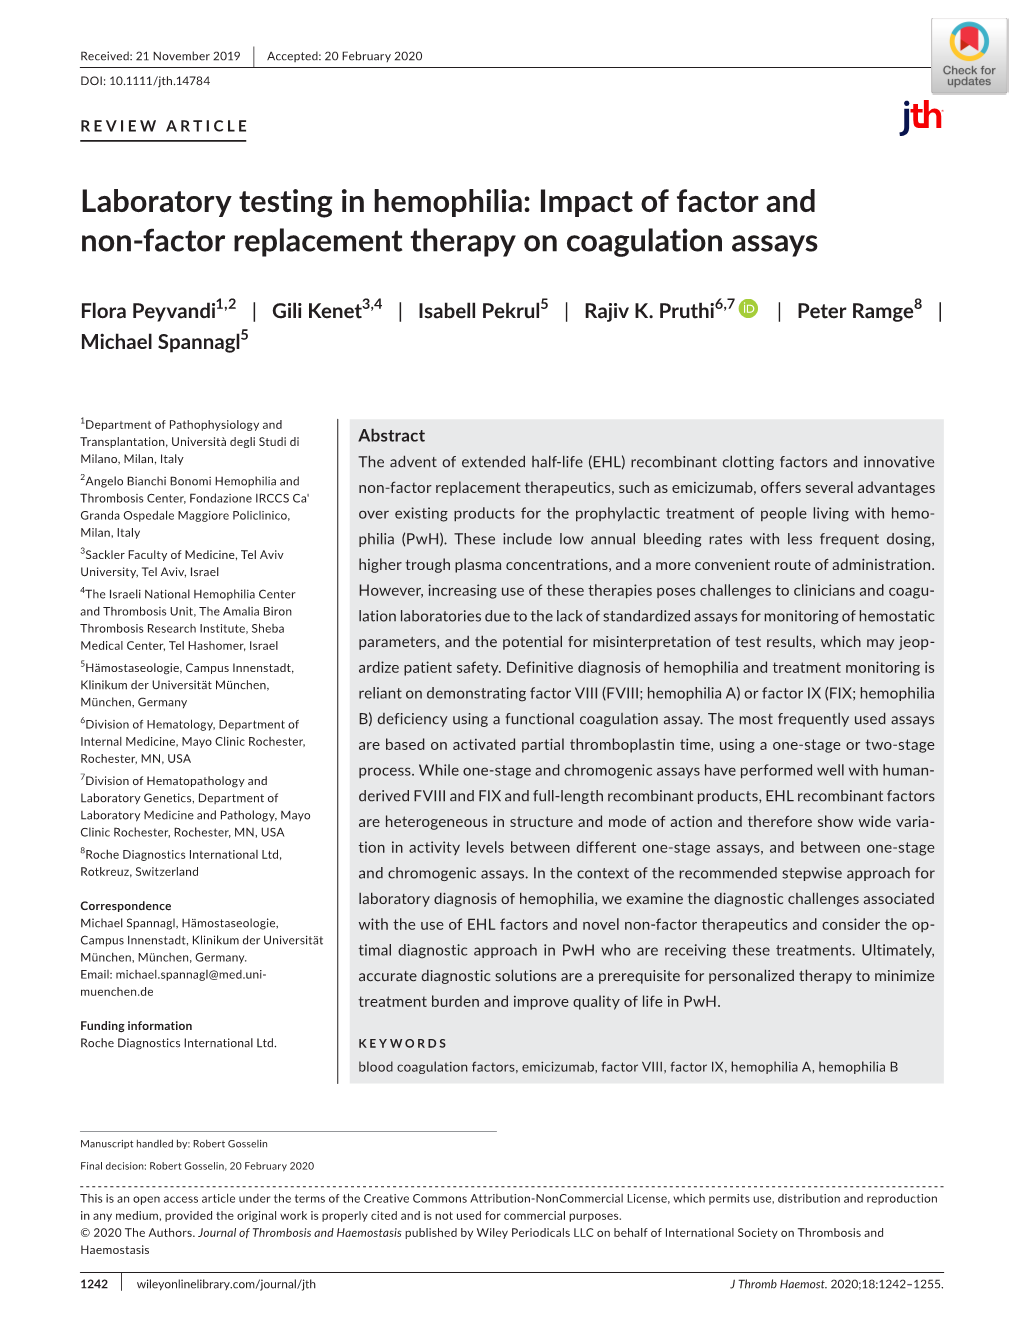 Laboratory Testing in Hemophilia: Impact of Factor and Non-Factor Replacement Therapy on Coagulation Assays